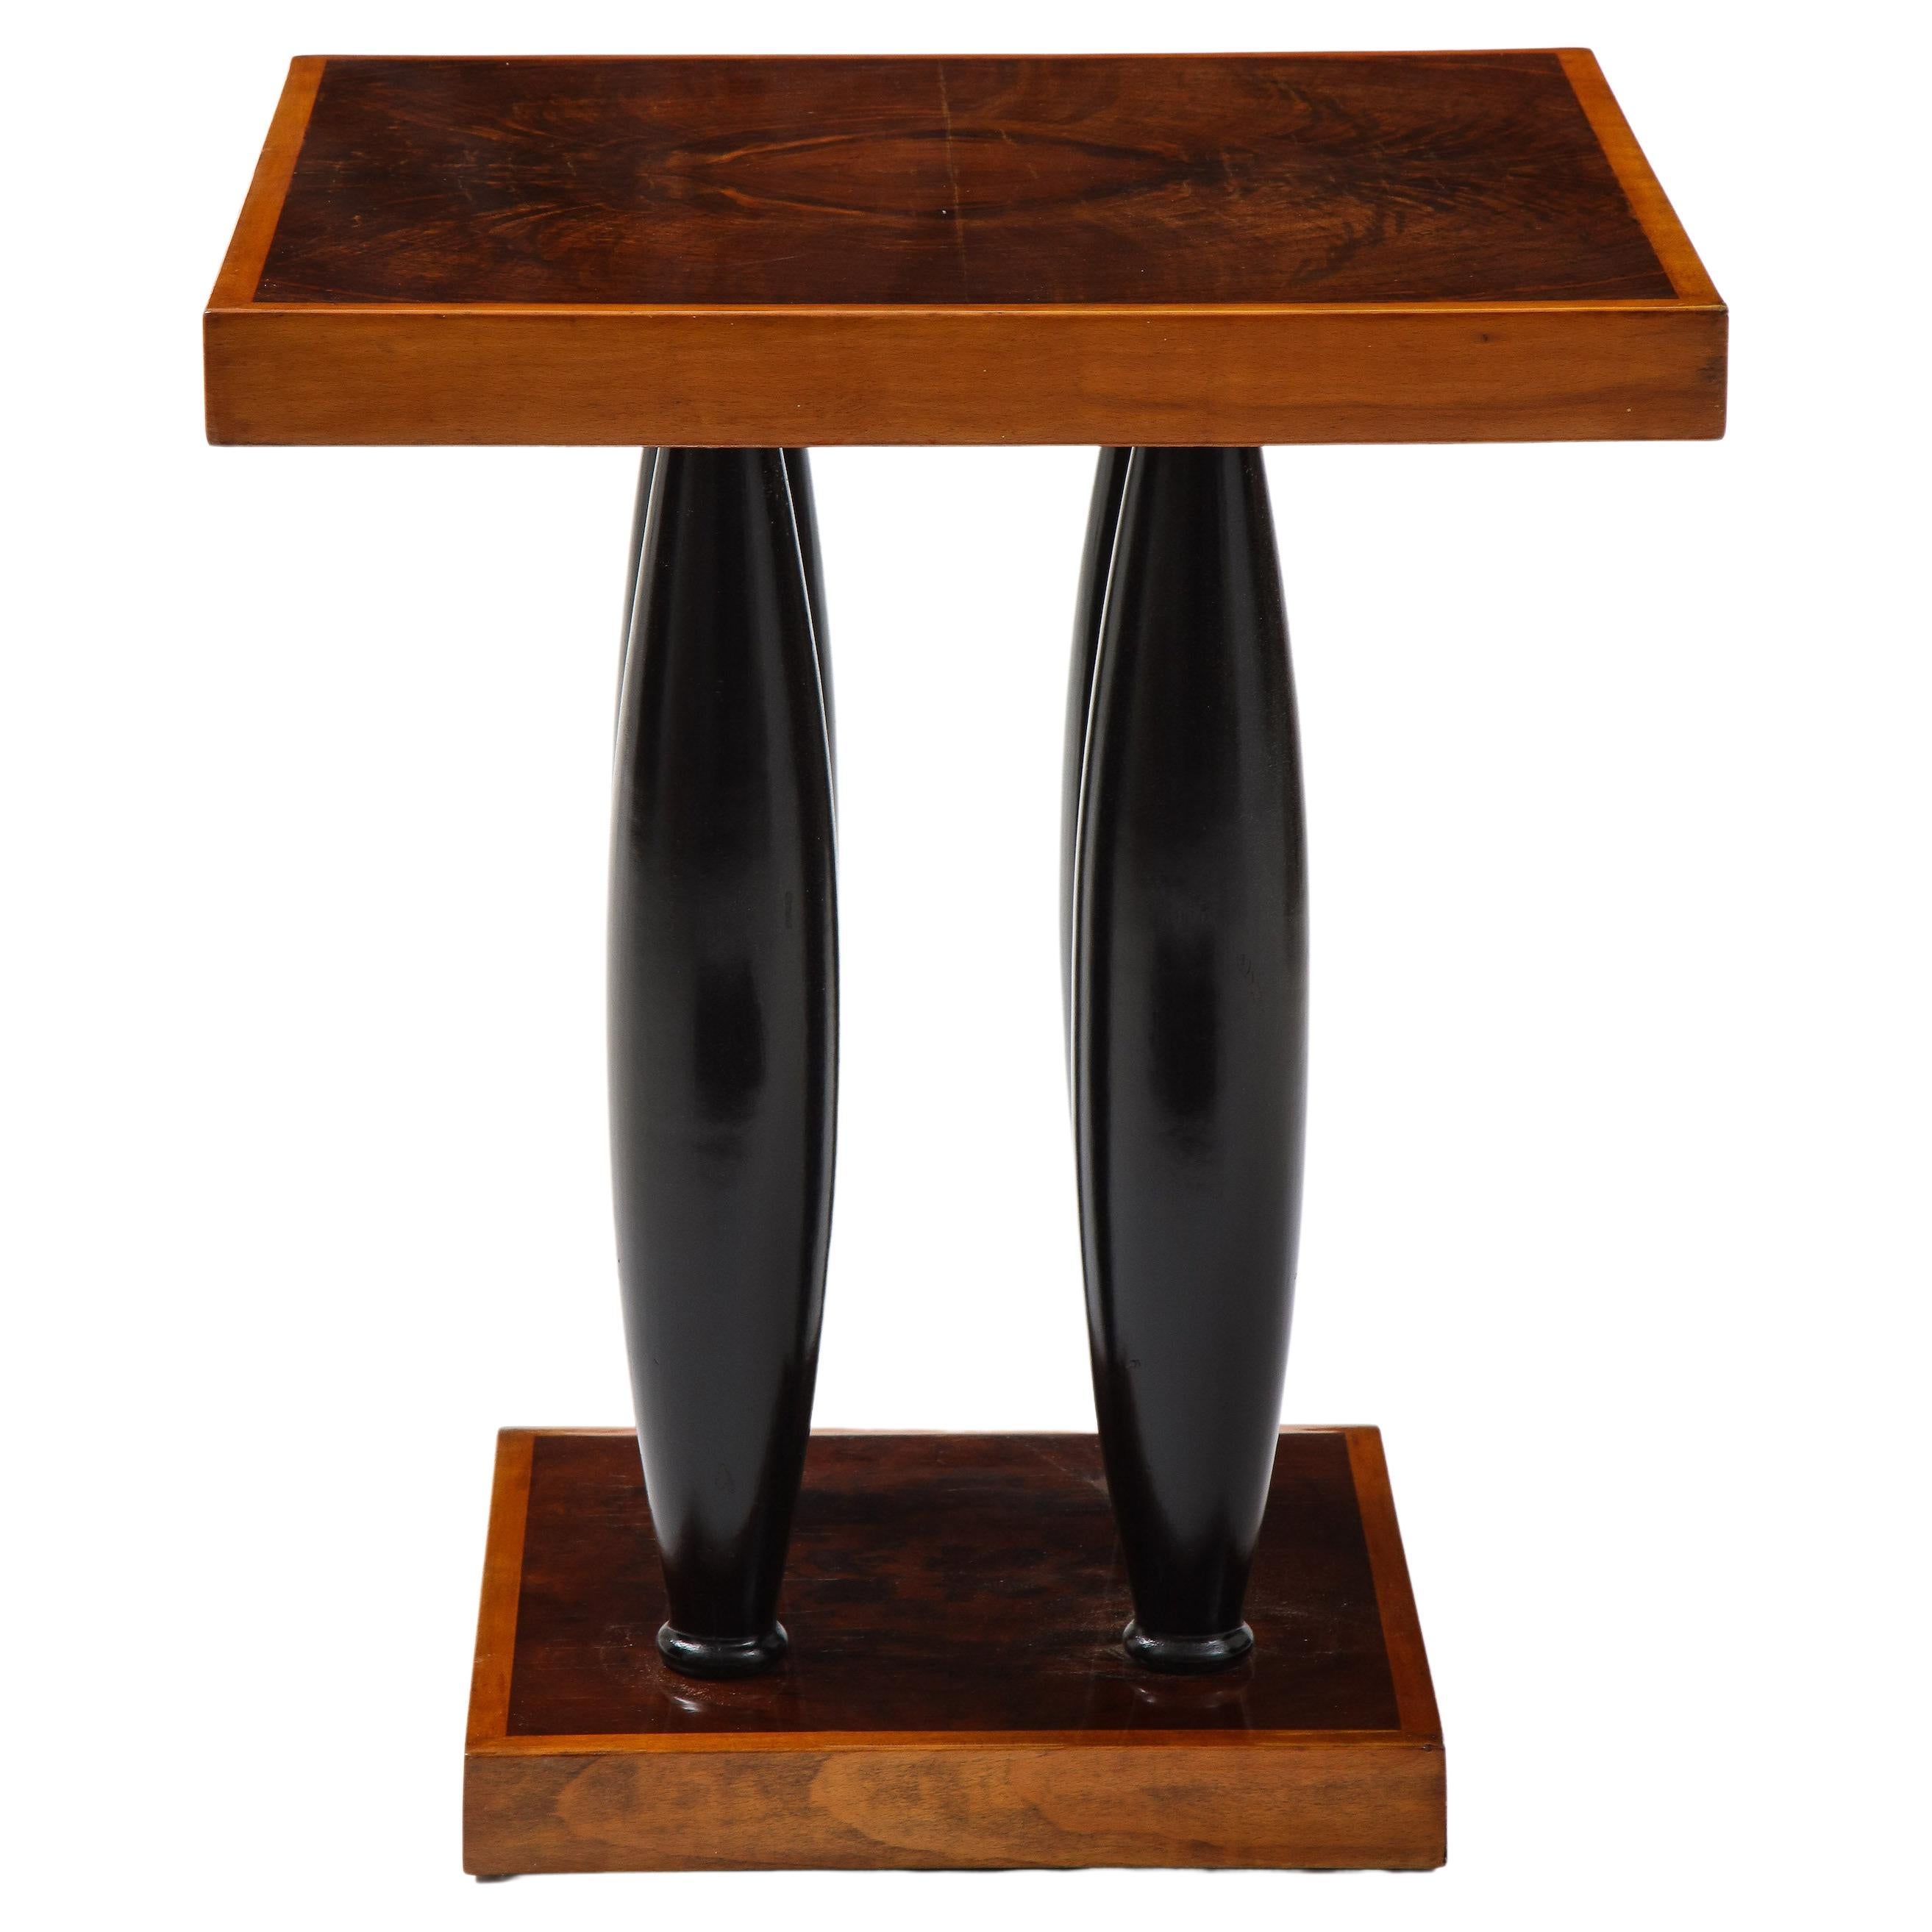 Art Deco walnut side table in the manner of Pierre Legrain featuring a top in walnut with four ebonised columns supports resting on a square base.